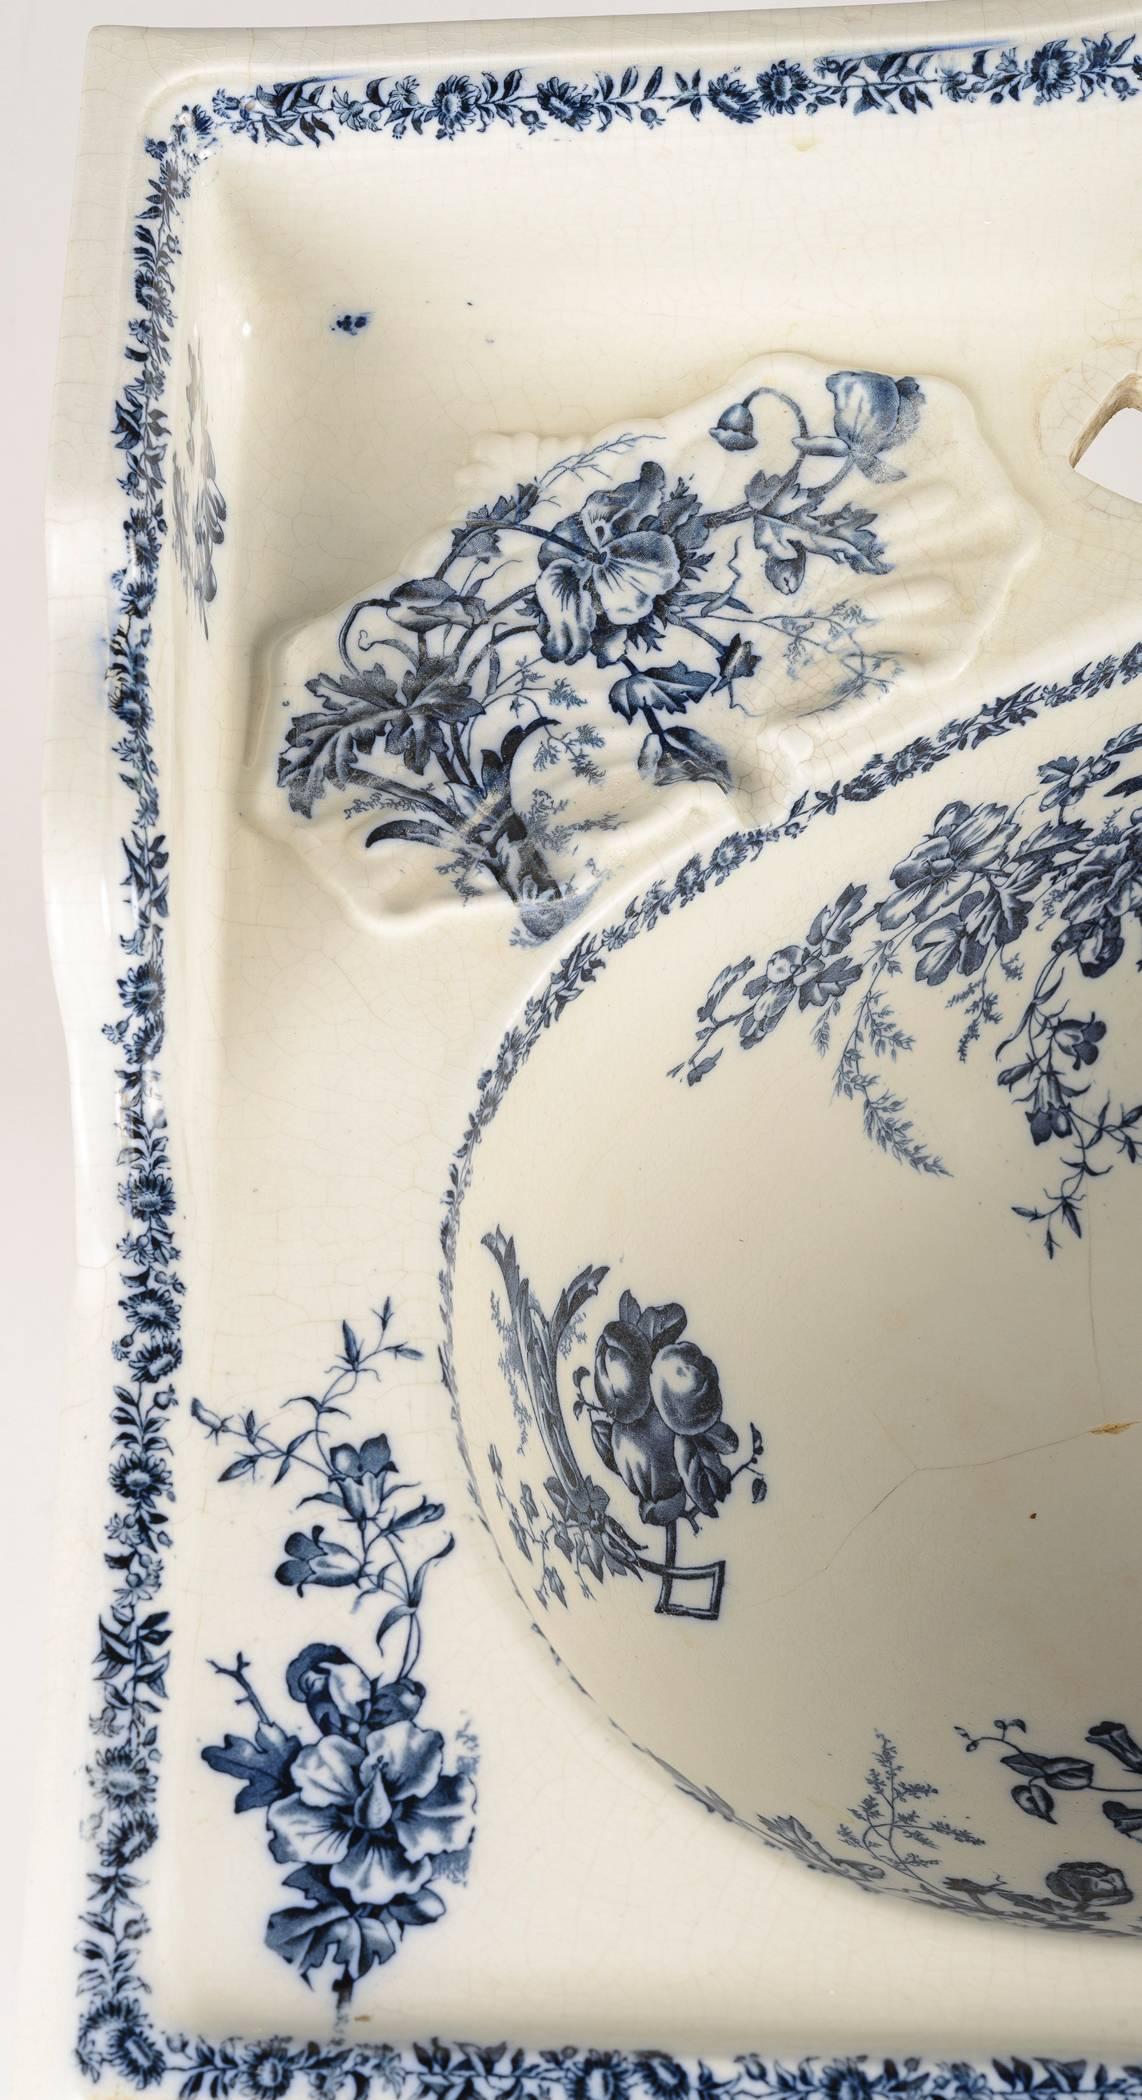 Blue and white transfer pattern of garland and flowers in the style of Berain, decorate this porcelain lavatory sink. The bowl has two soap 